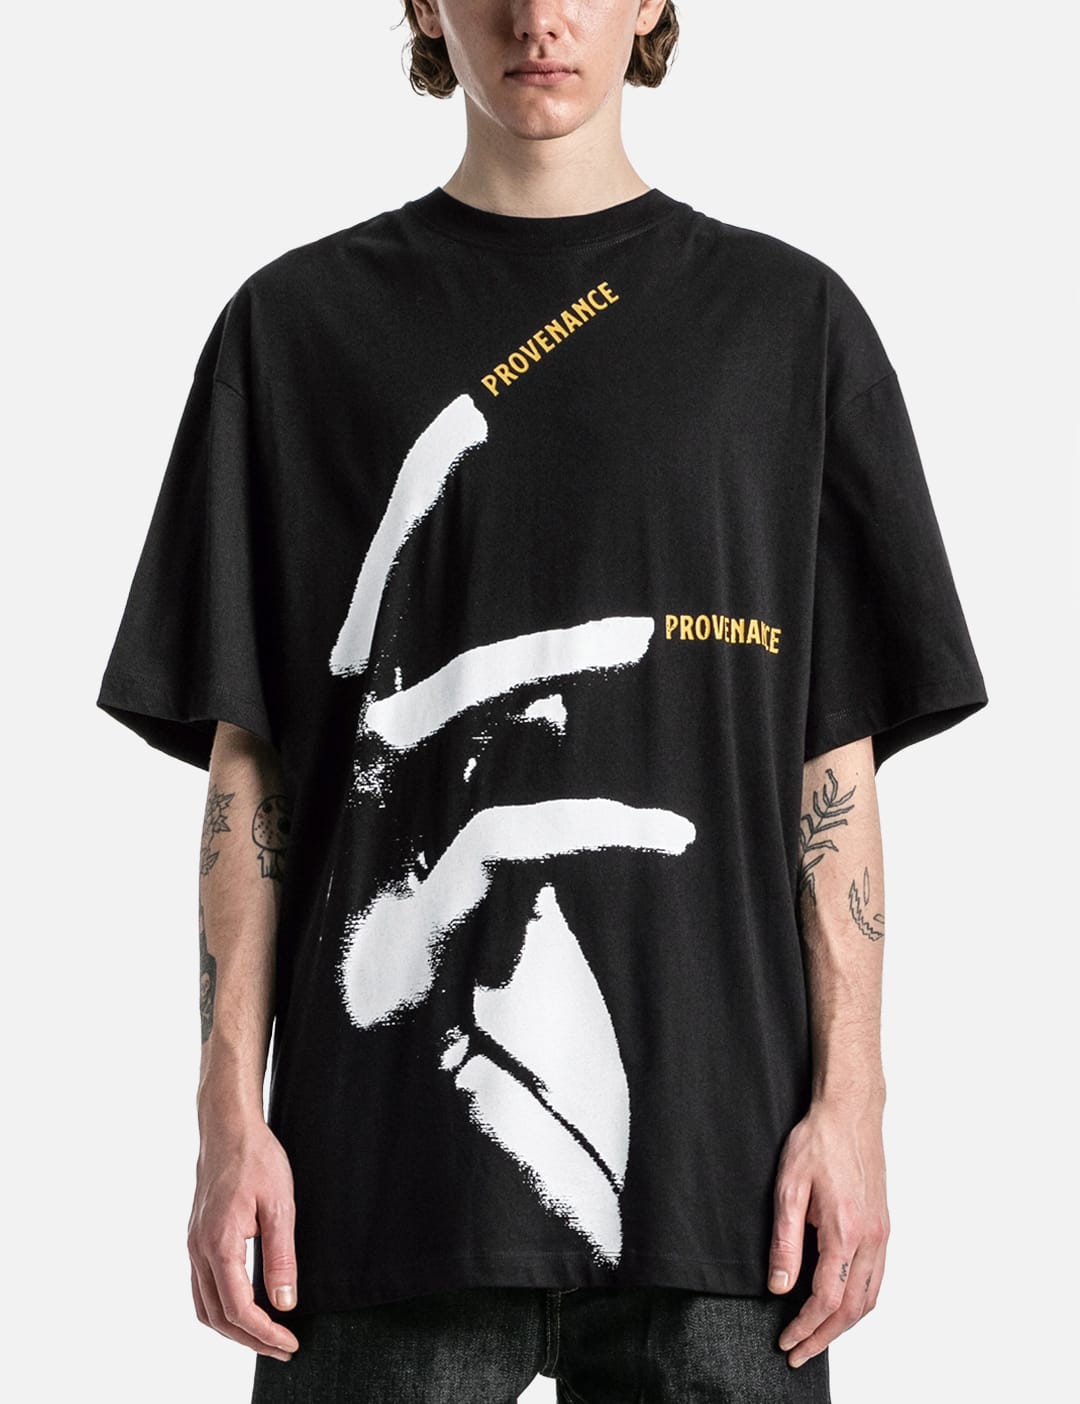 Raf Simons - Printworks Tour T-shirt | HBX - Globally Curated ...